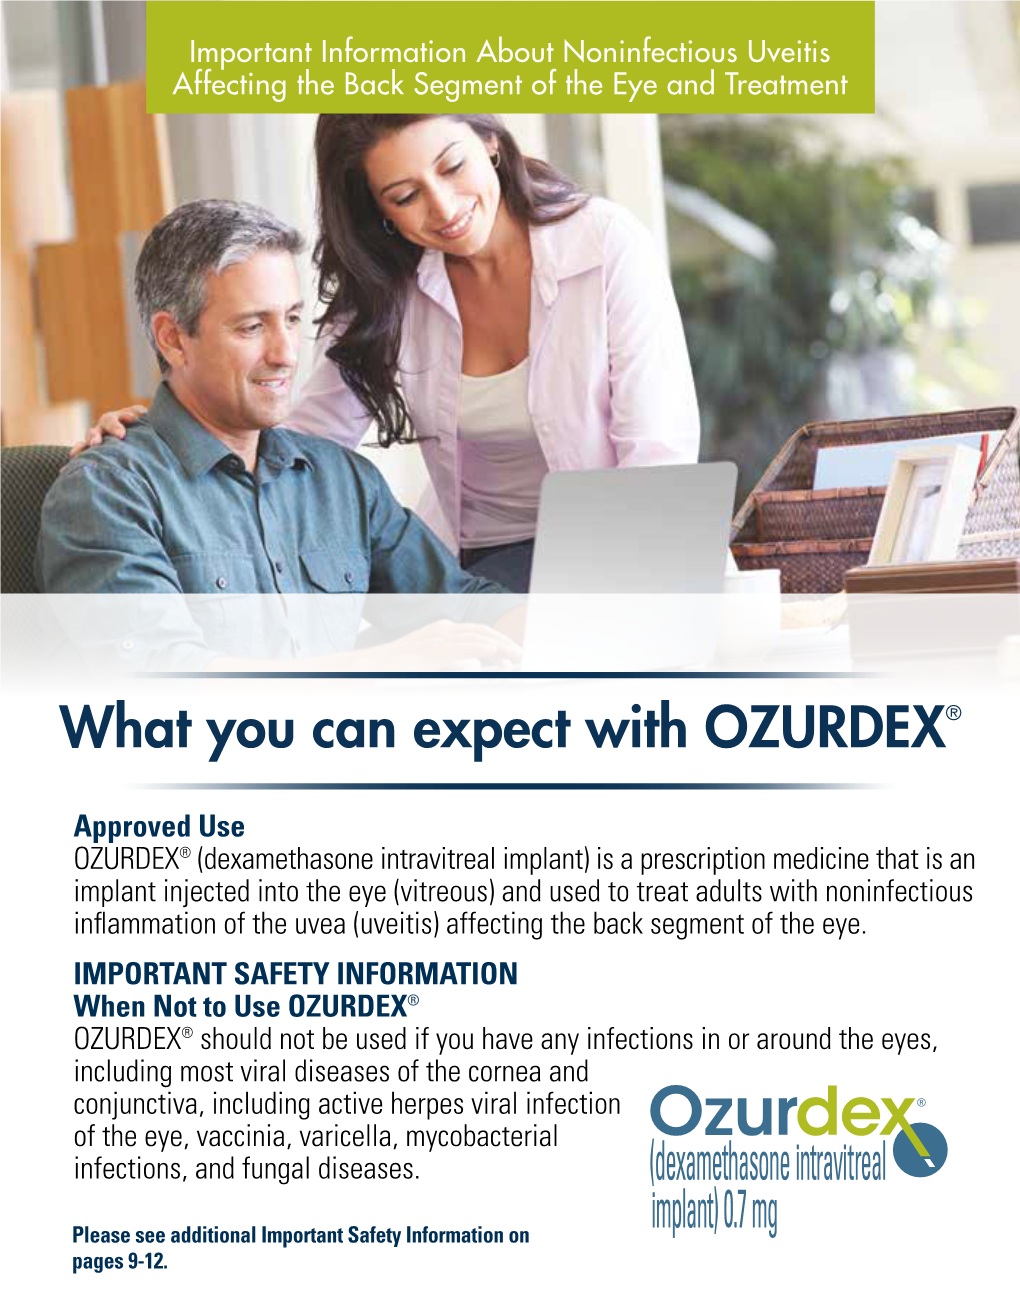 What You Can Expect with OZURDEX®